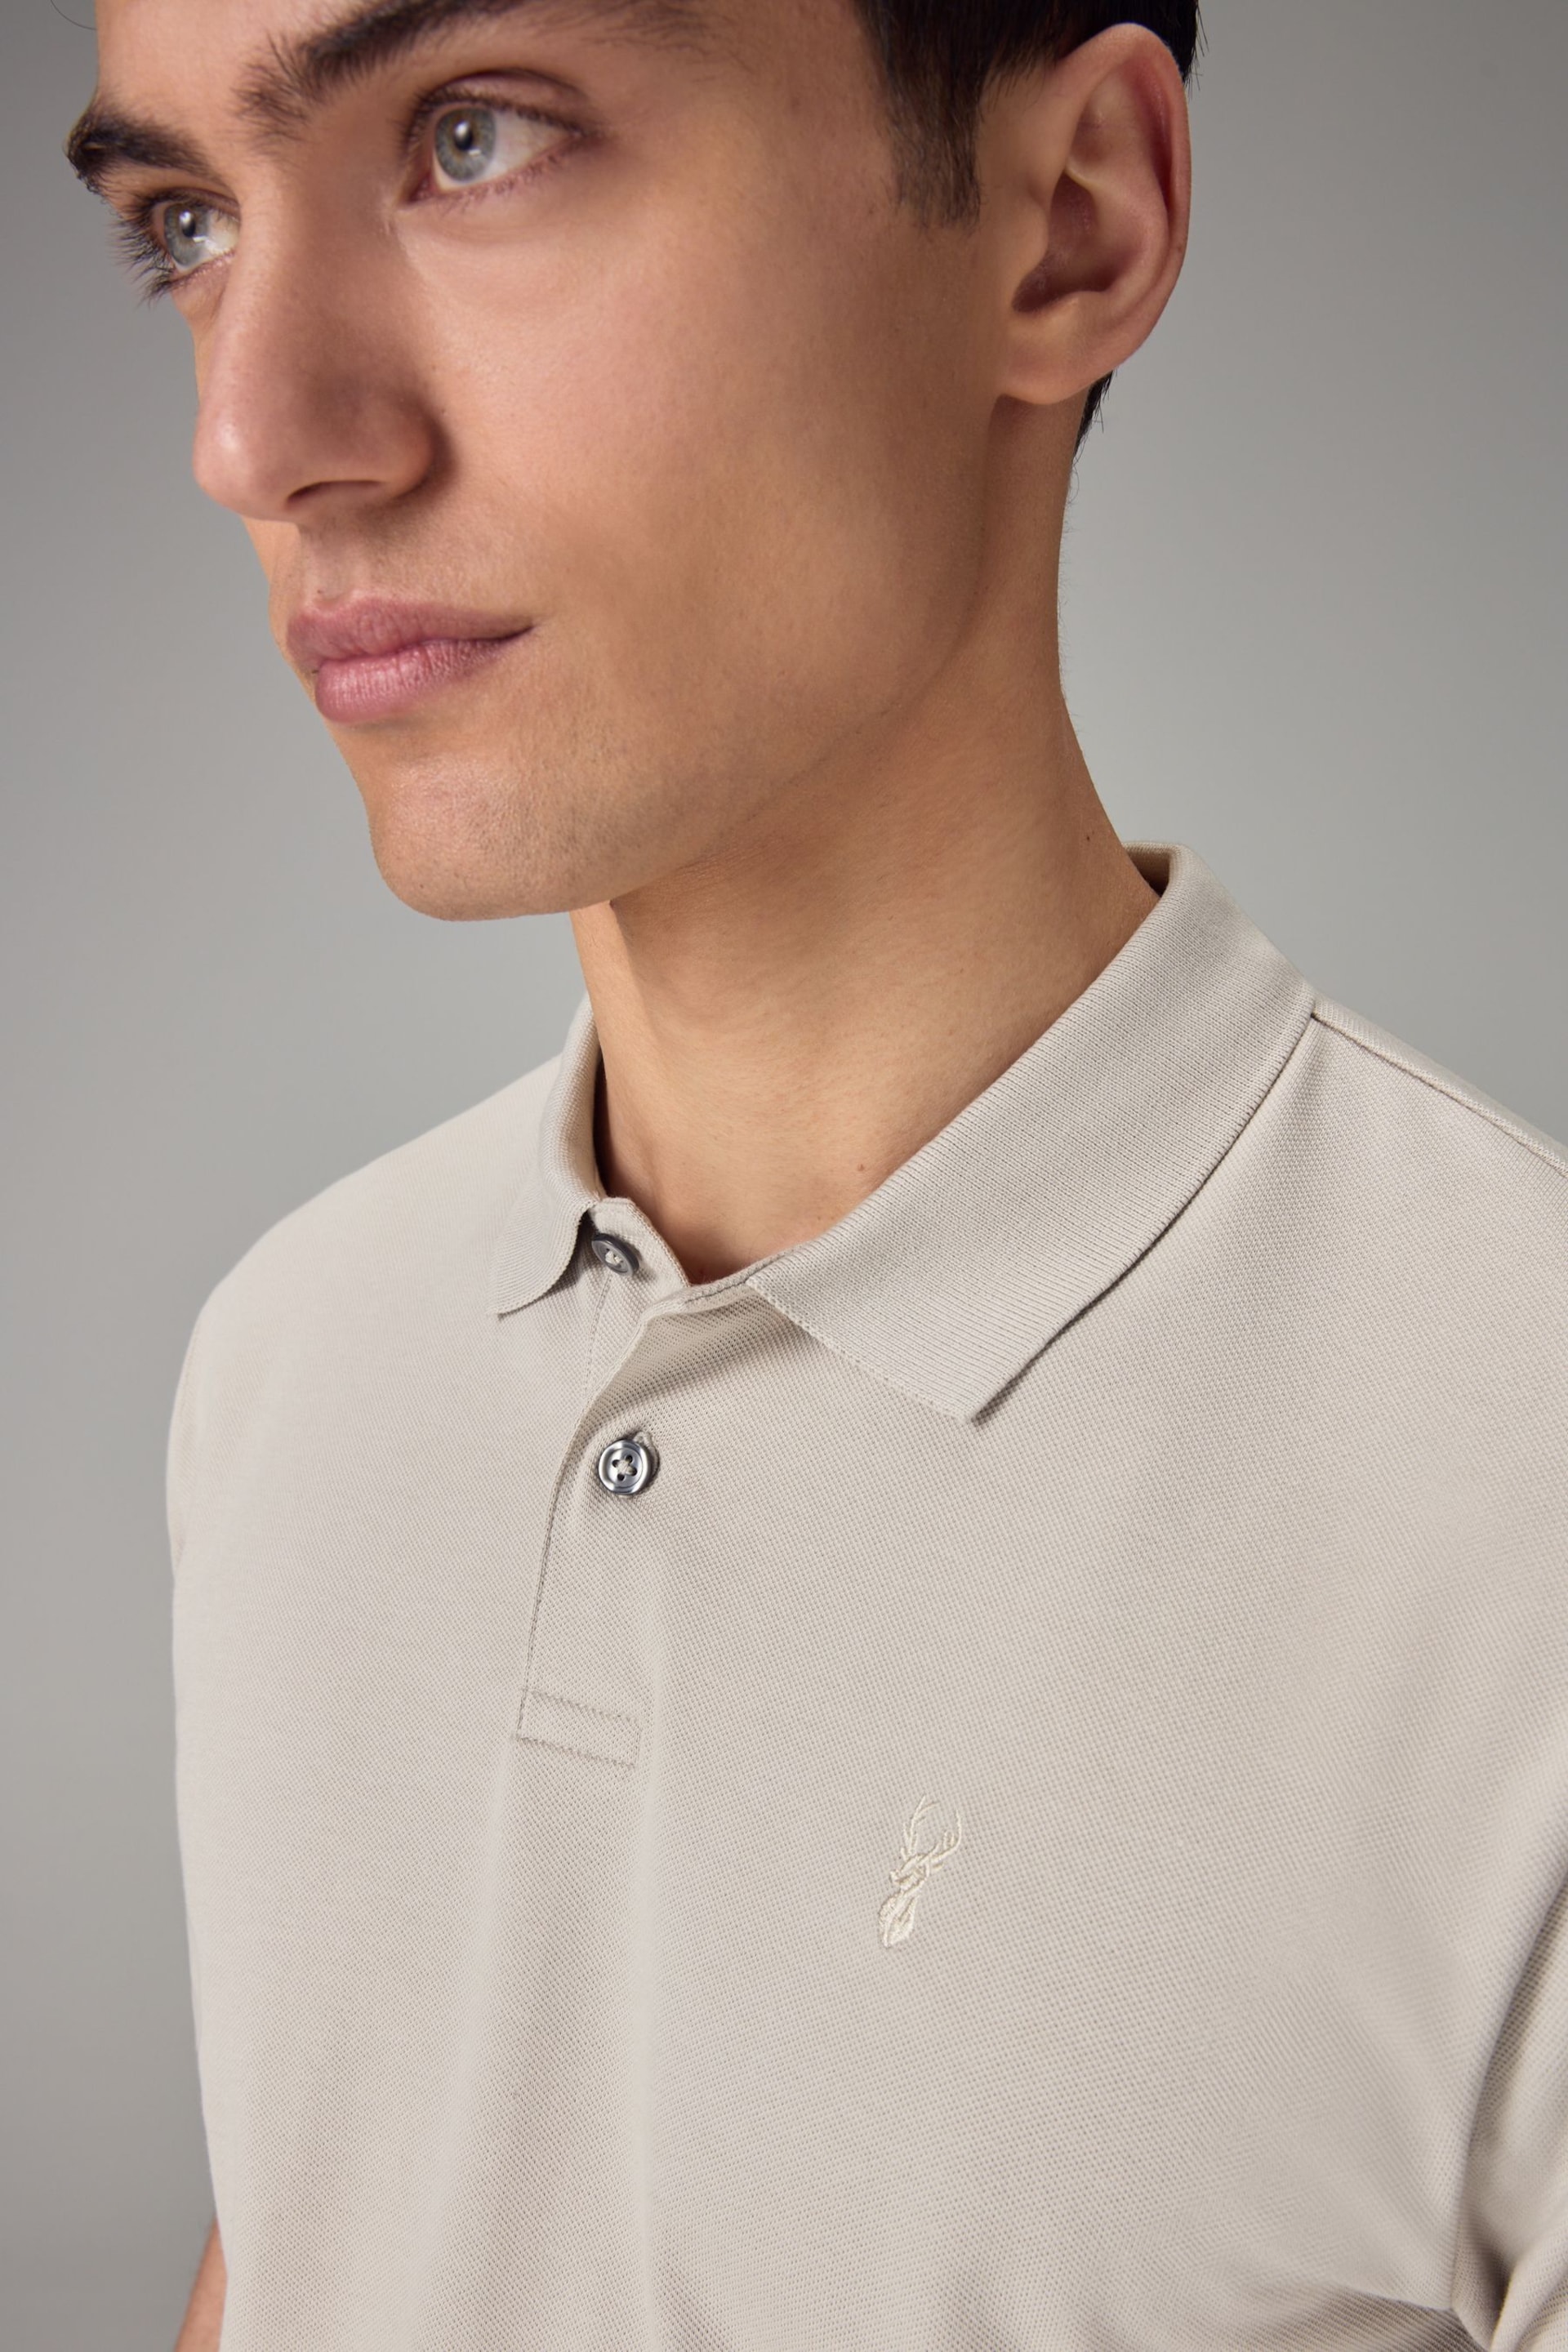 Neutral Slim Fit Short Sleeve Pique Polo Shirt - Image 4 of 5